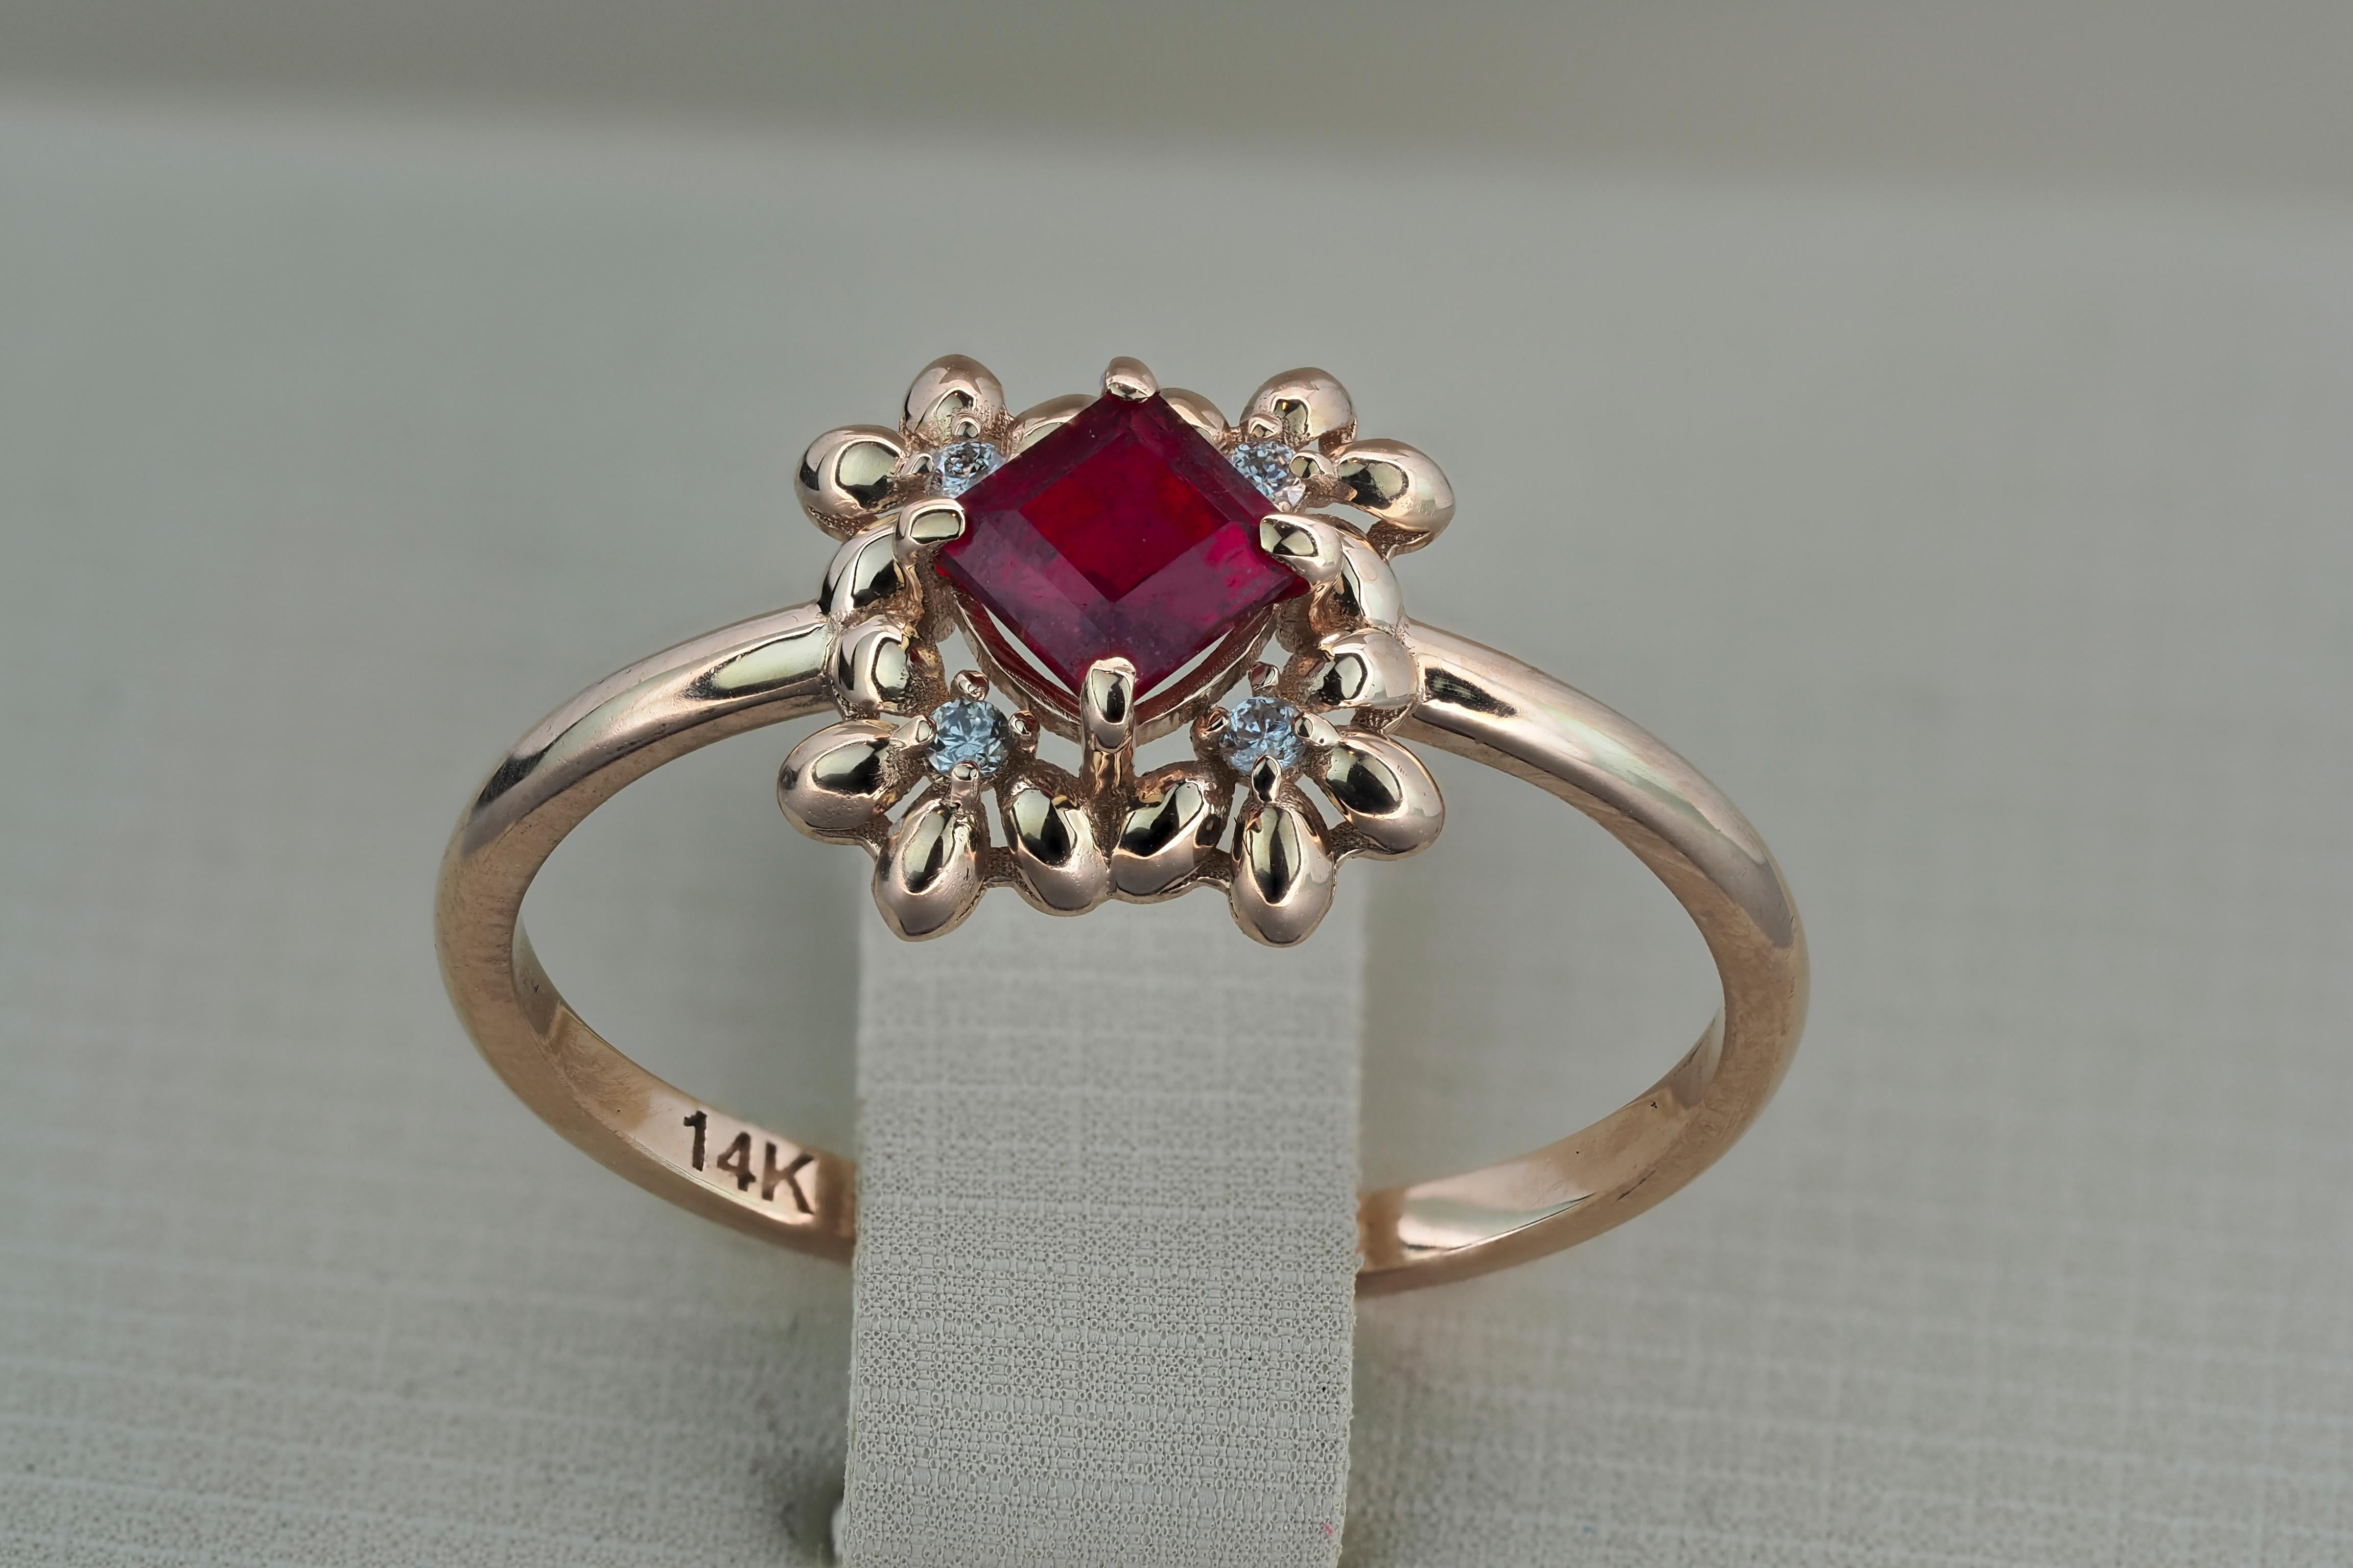 For Sale:  14 karat Gold Ring with Ruby and Diamonds 6